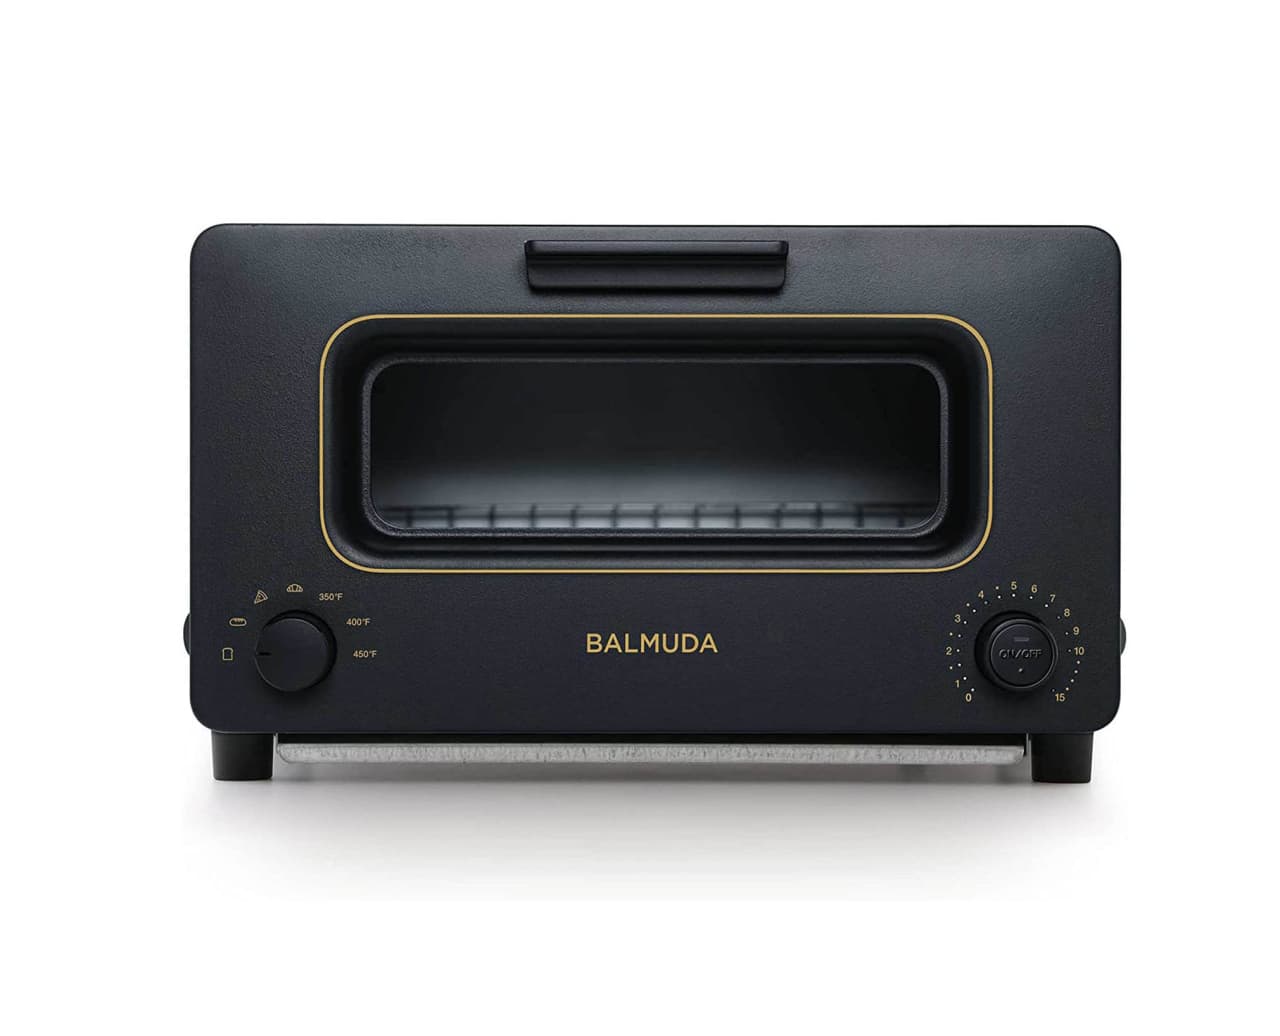 Is This $300 Toaster Worth It?, Balmuda The Toaster